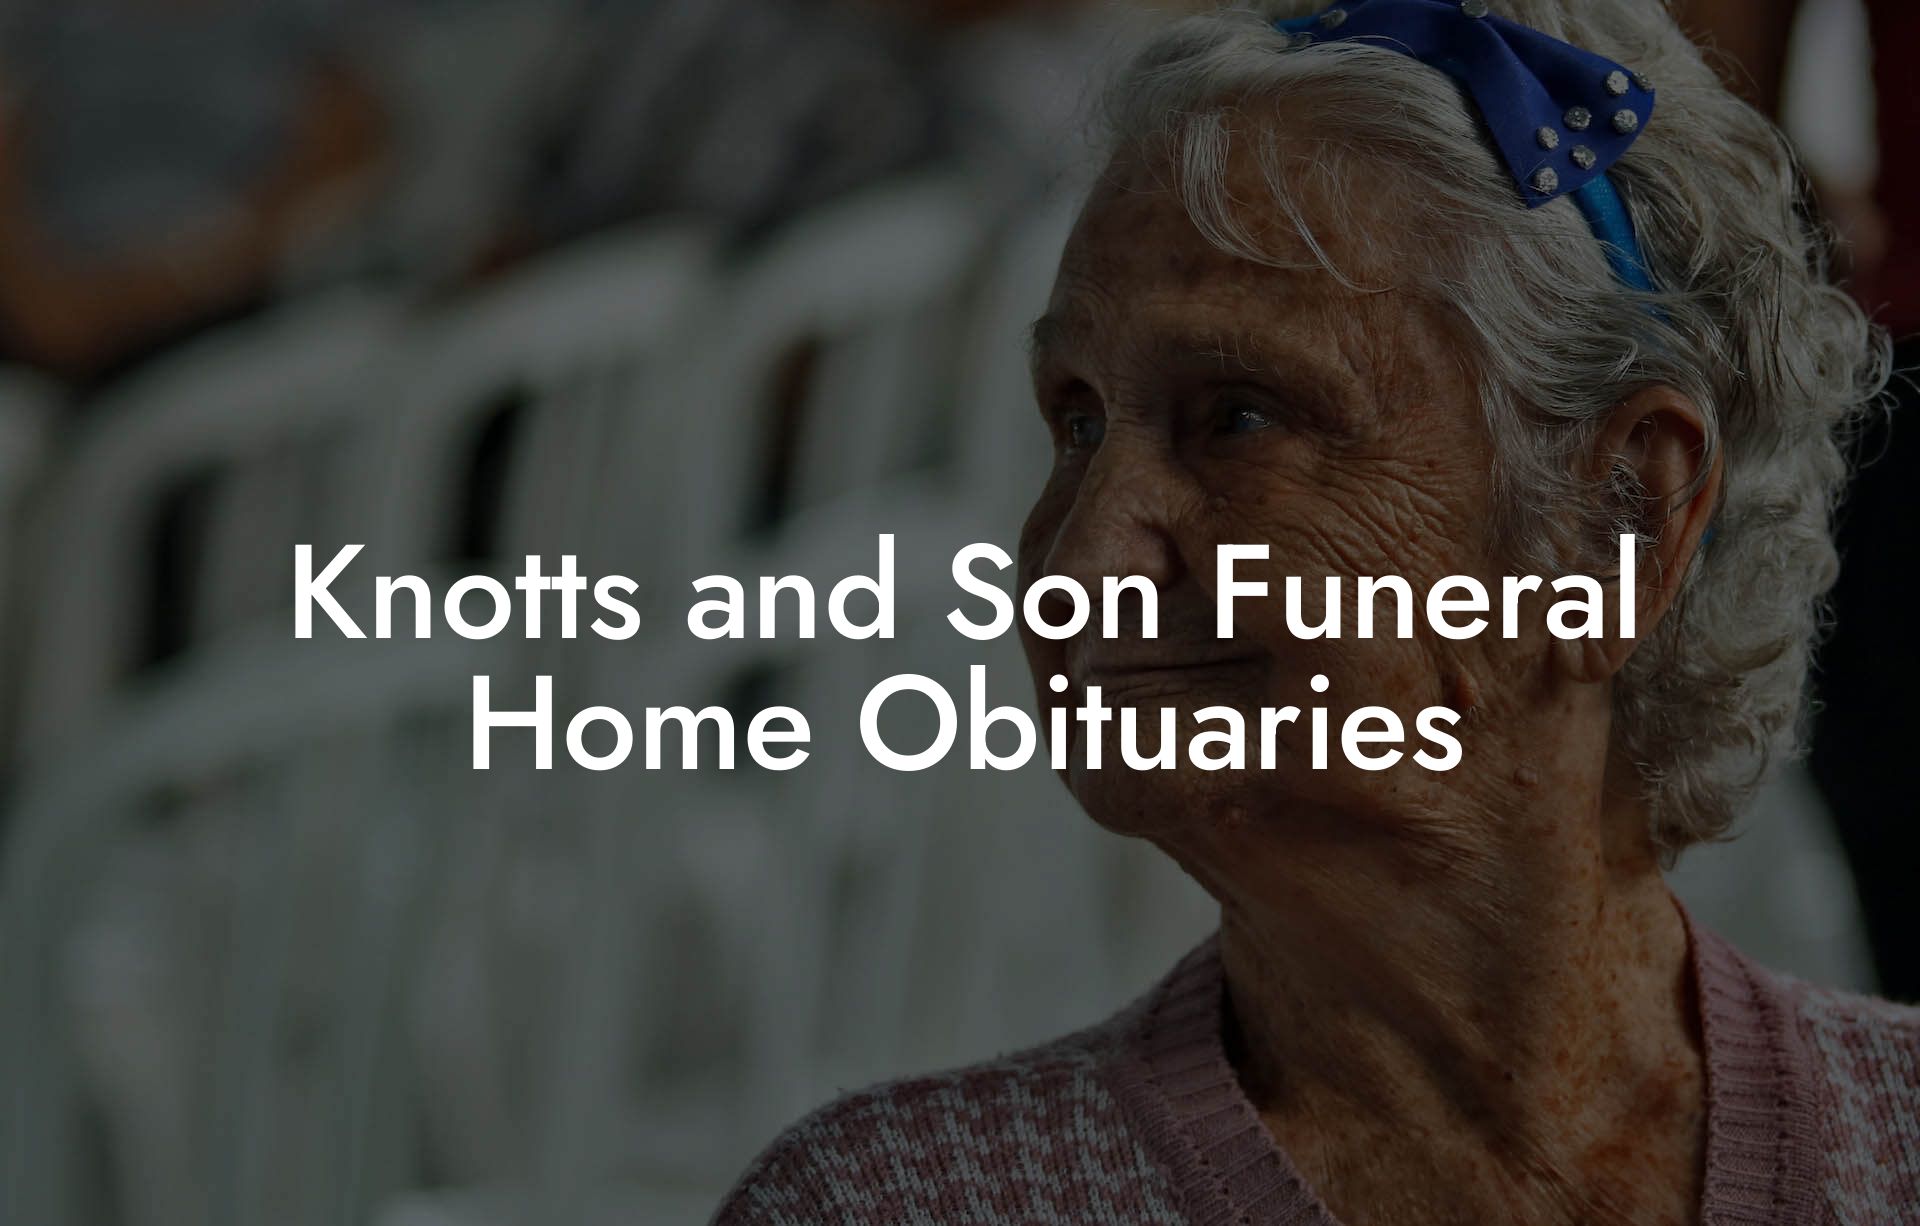 Knotts and Son Funeral Home Obituaries